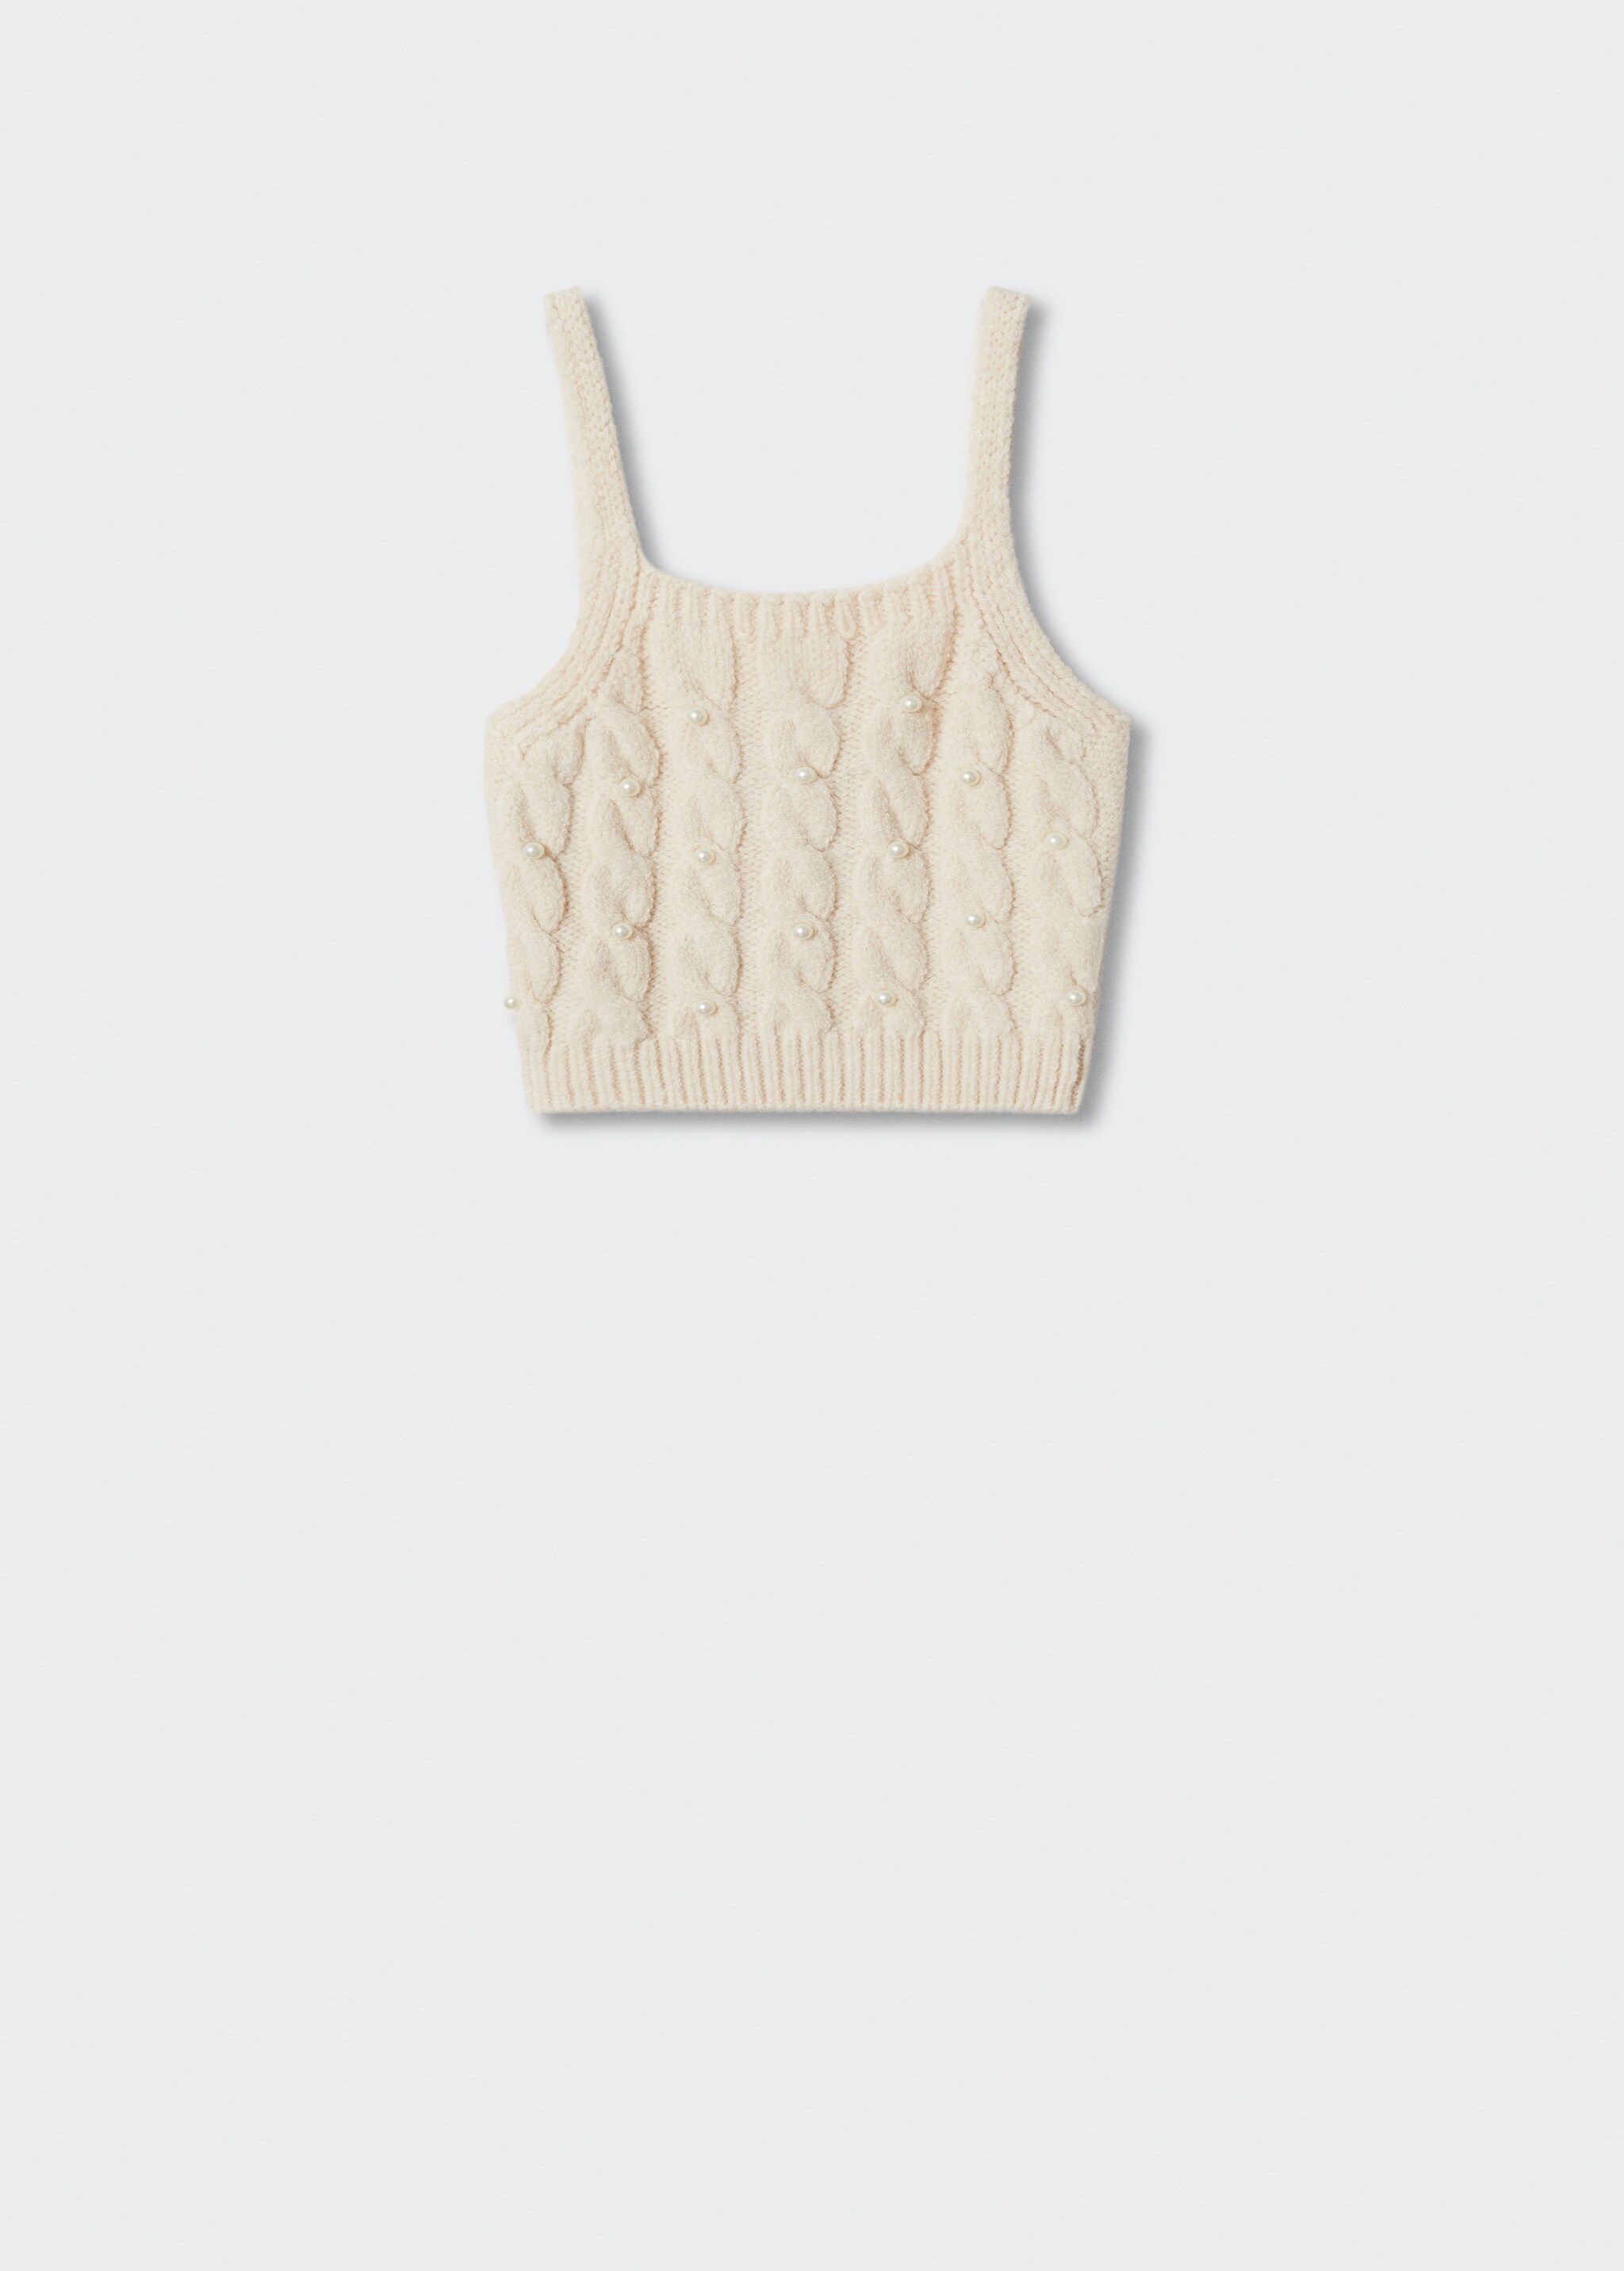 Pearl braided knitted top - Article without model